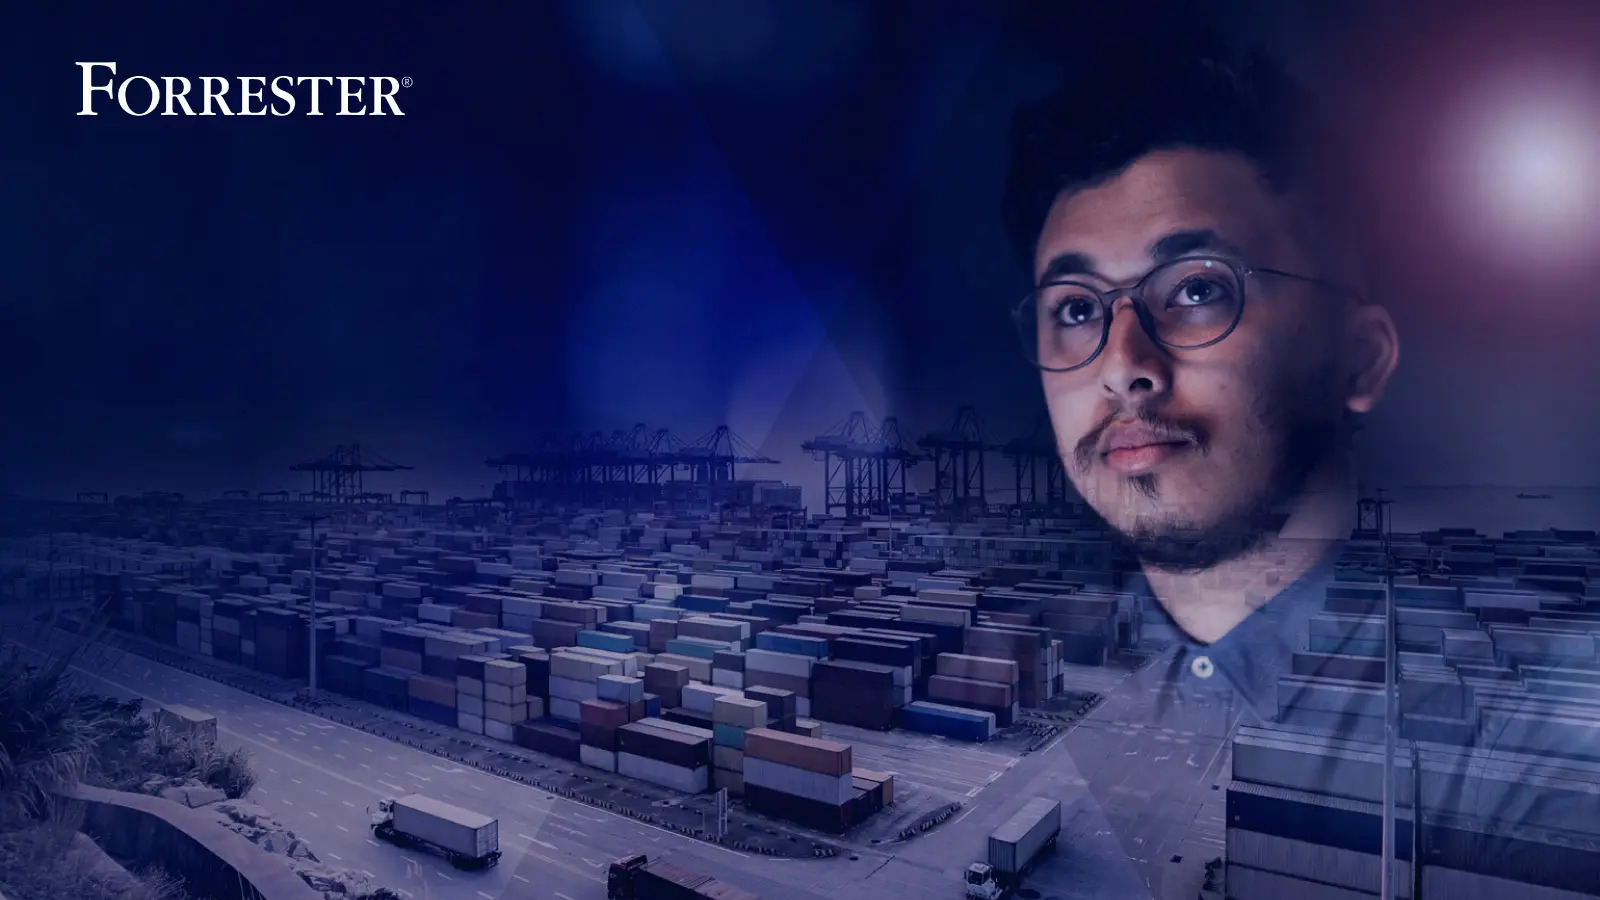 Man overlooking a shipping yard full of freight containers